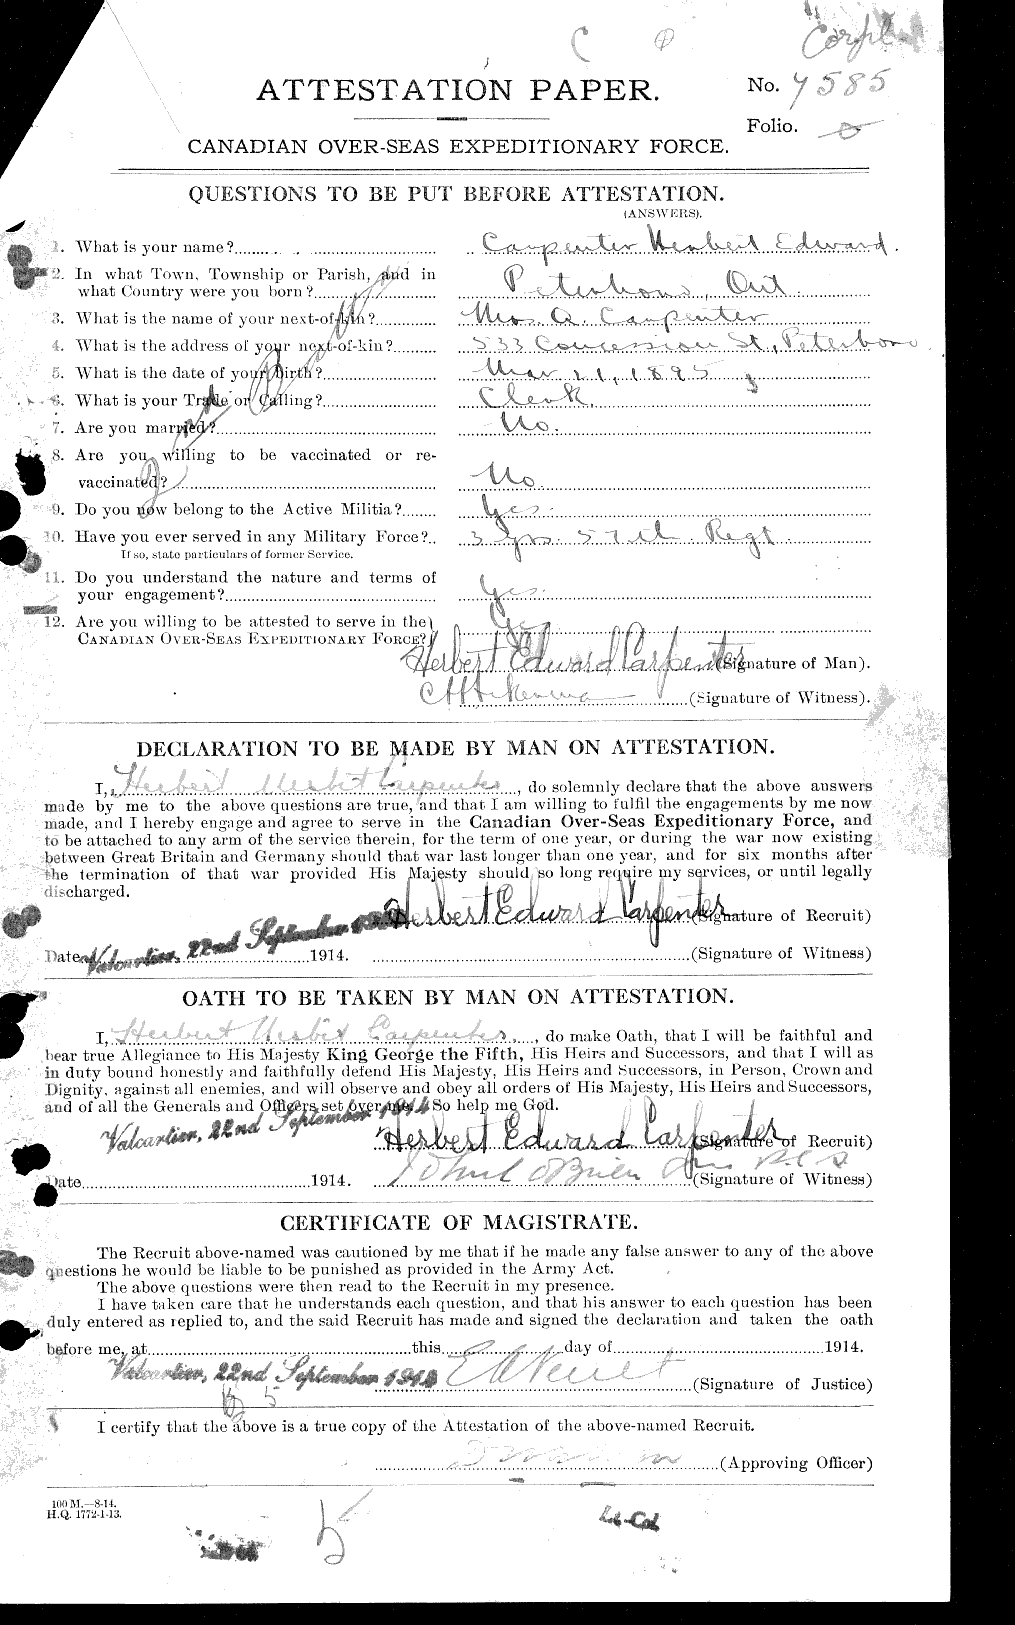 Personnel Records of the First World War - CEF 005236a